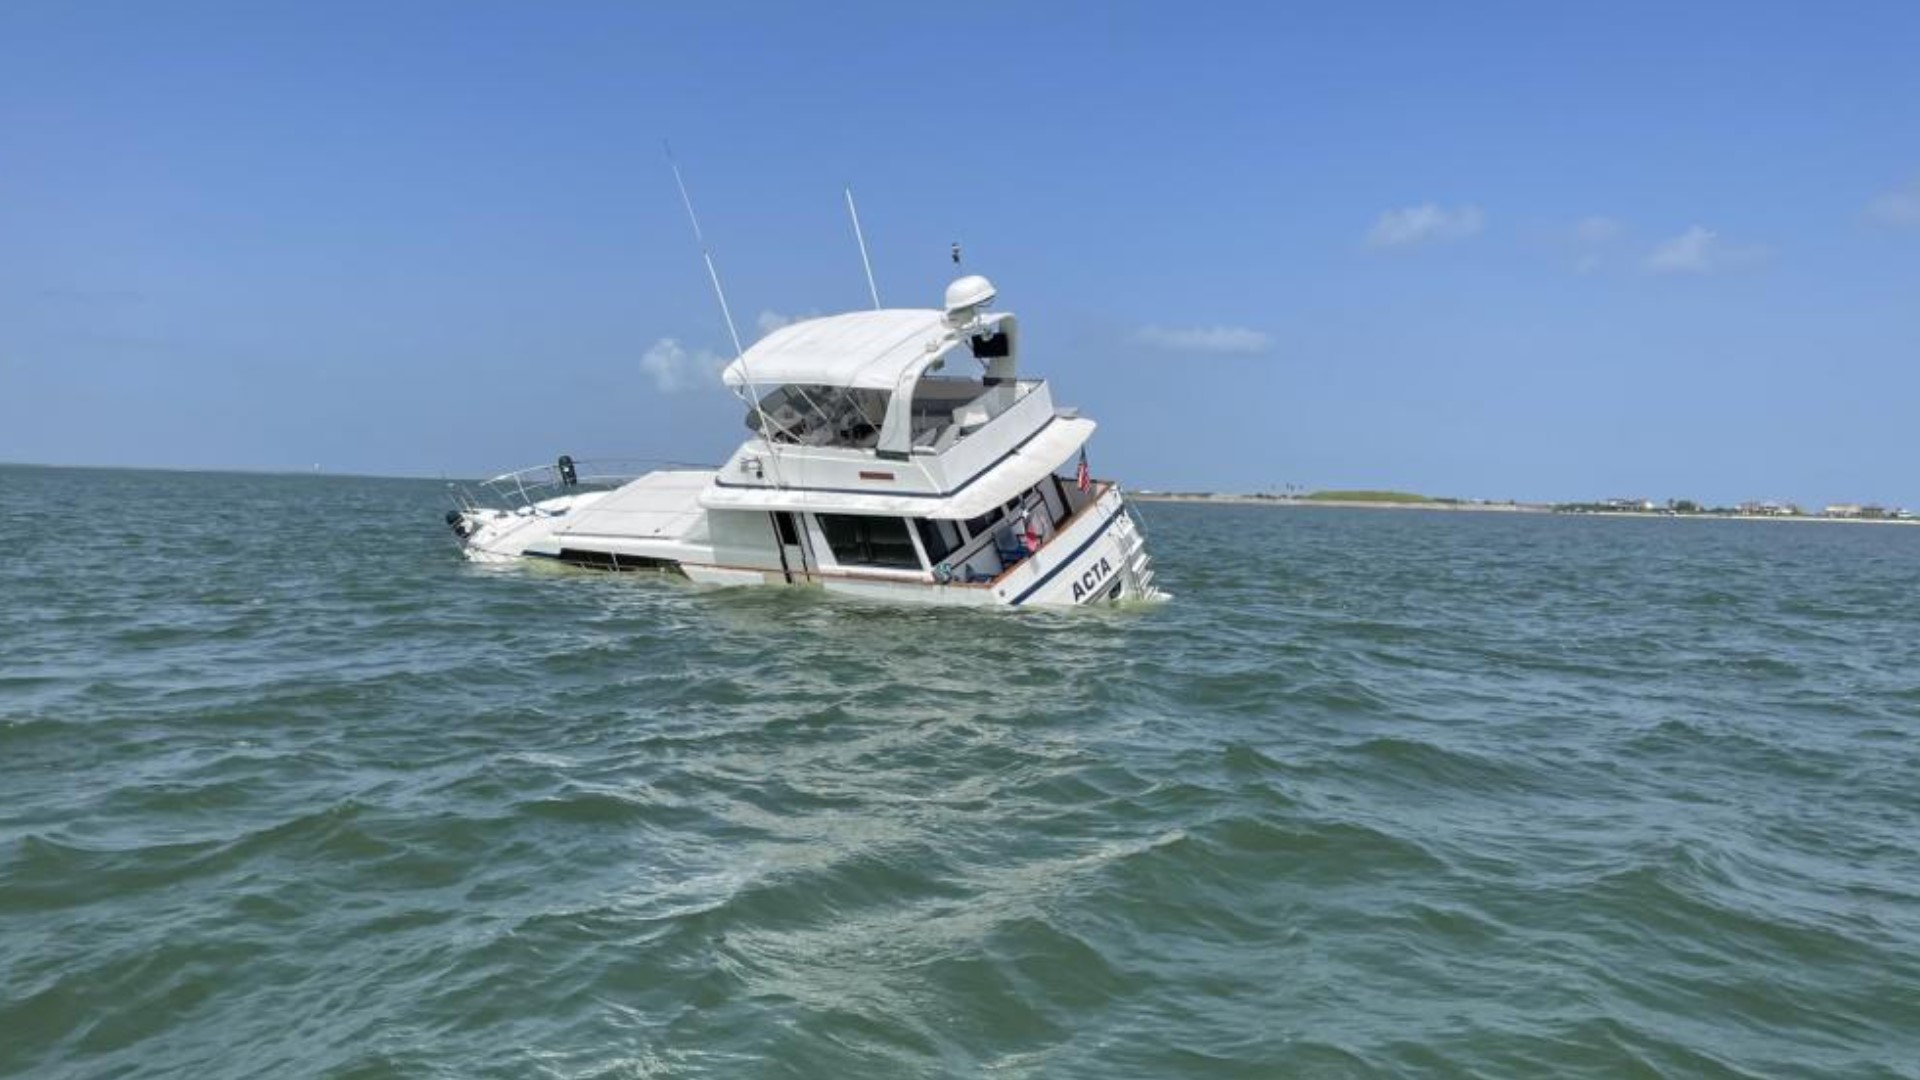 All four boaters were said to be stable, but one had to be transported to a Galveston facility for back and neck injuries.